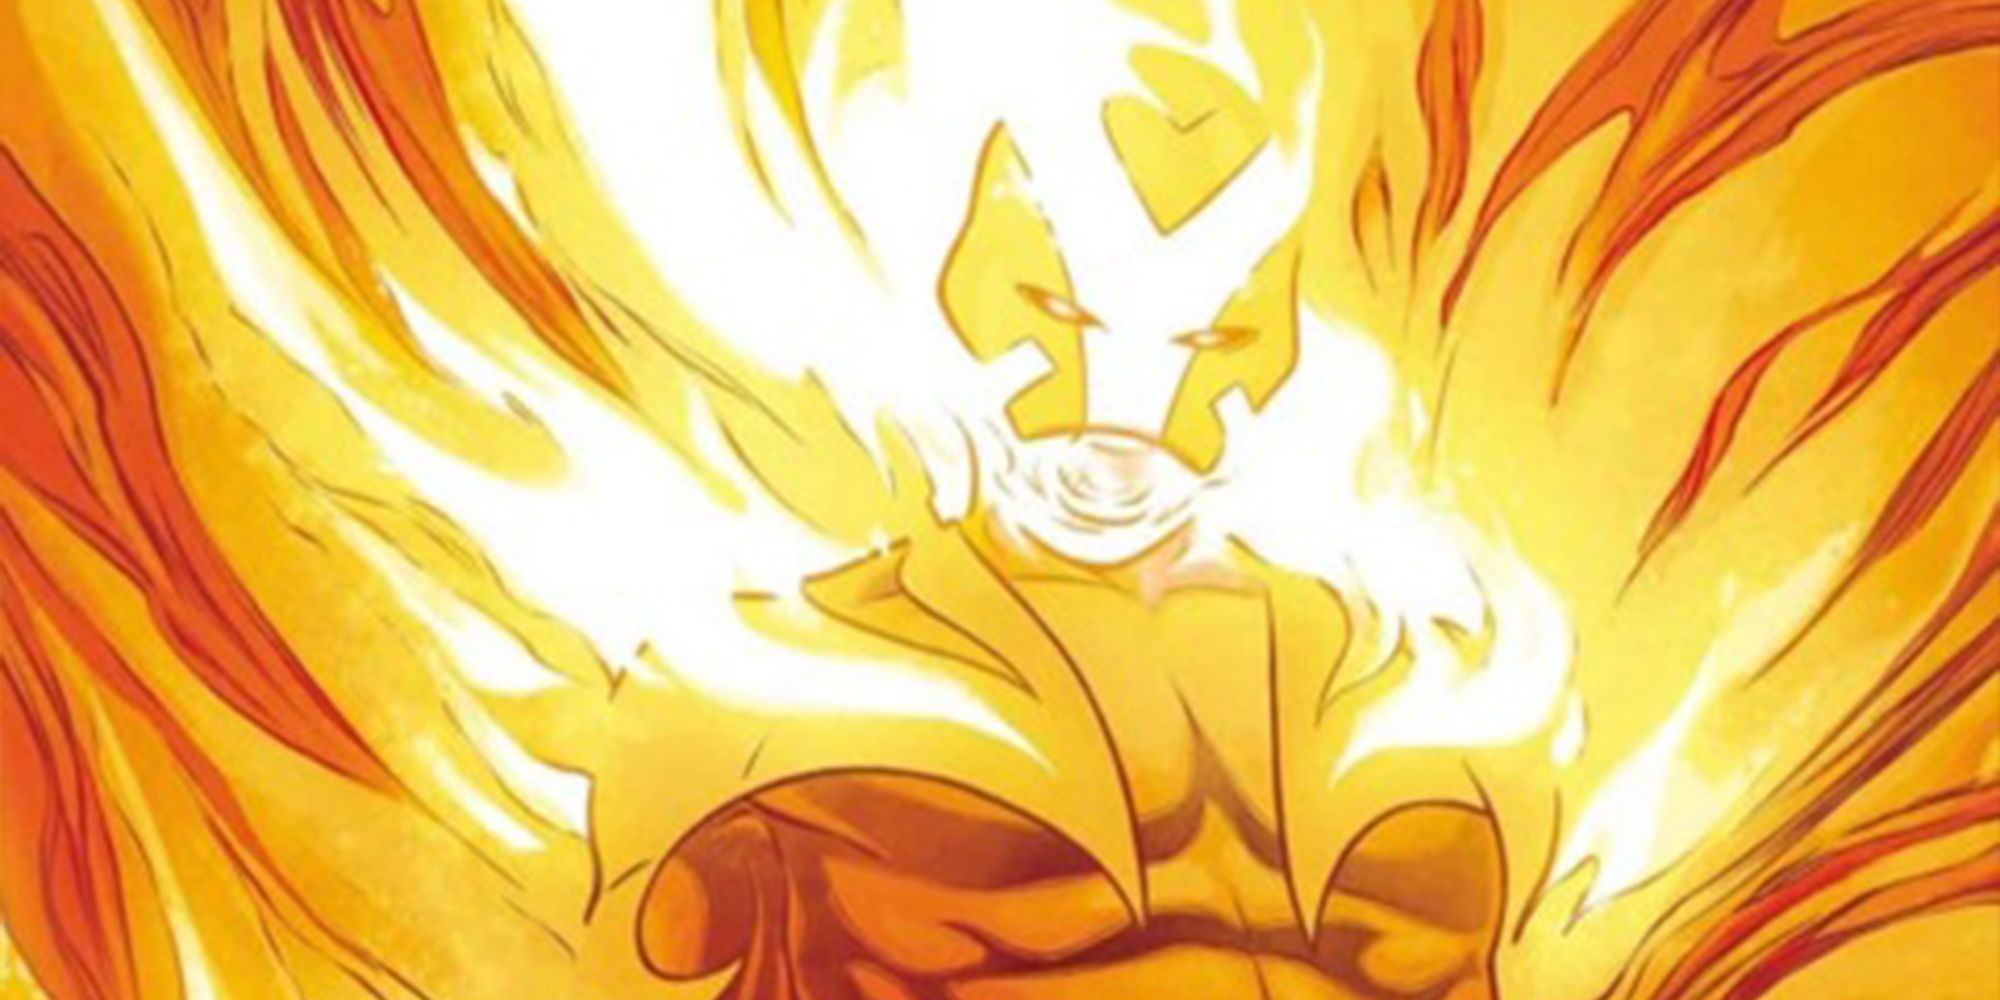 Sunfire from the X-Men on Fire